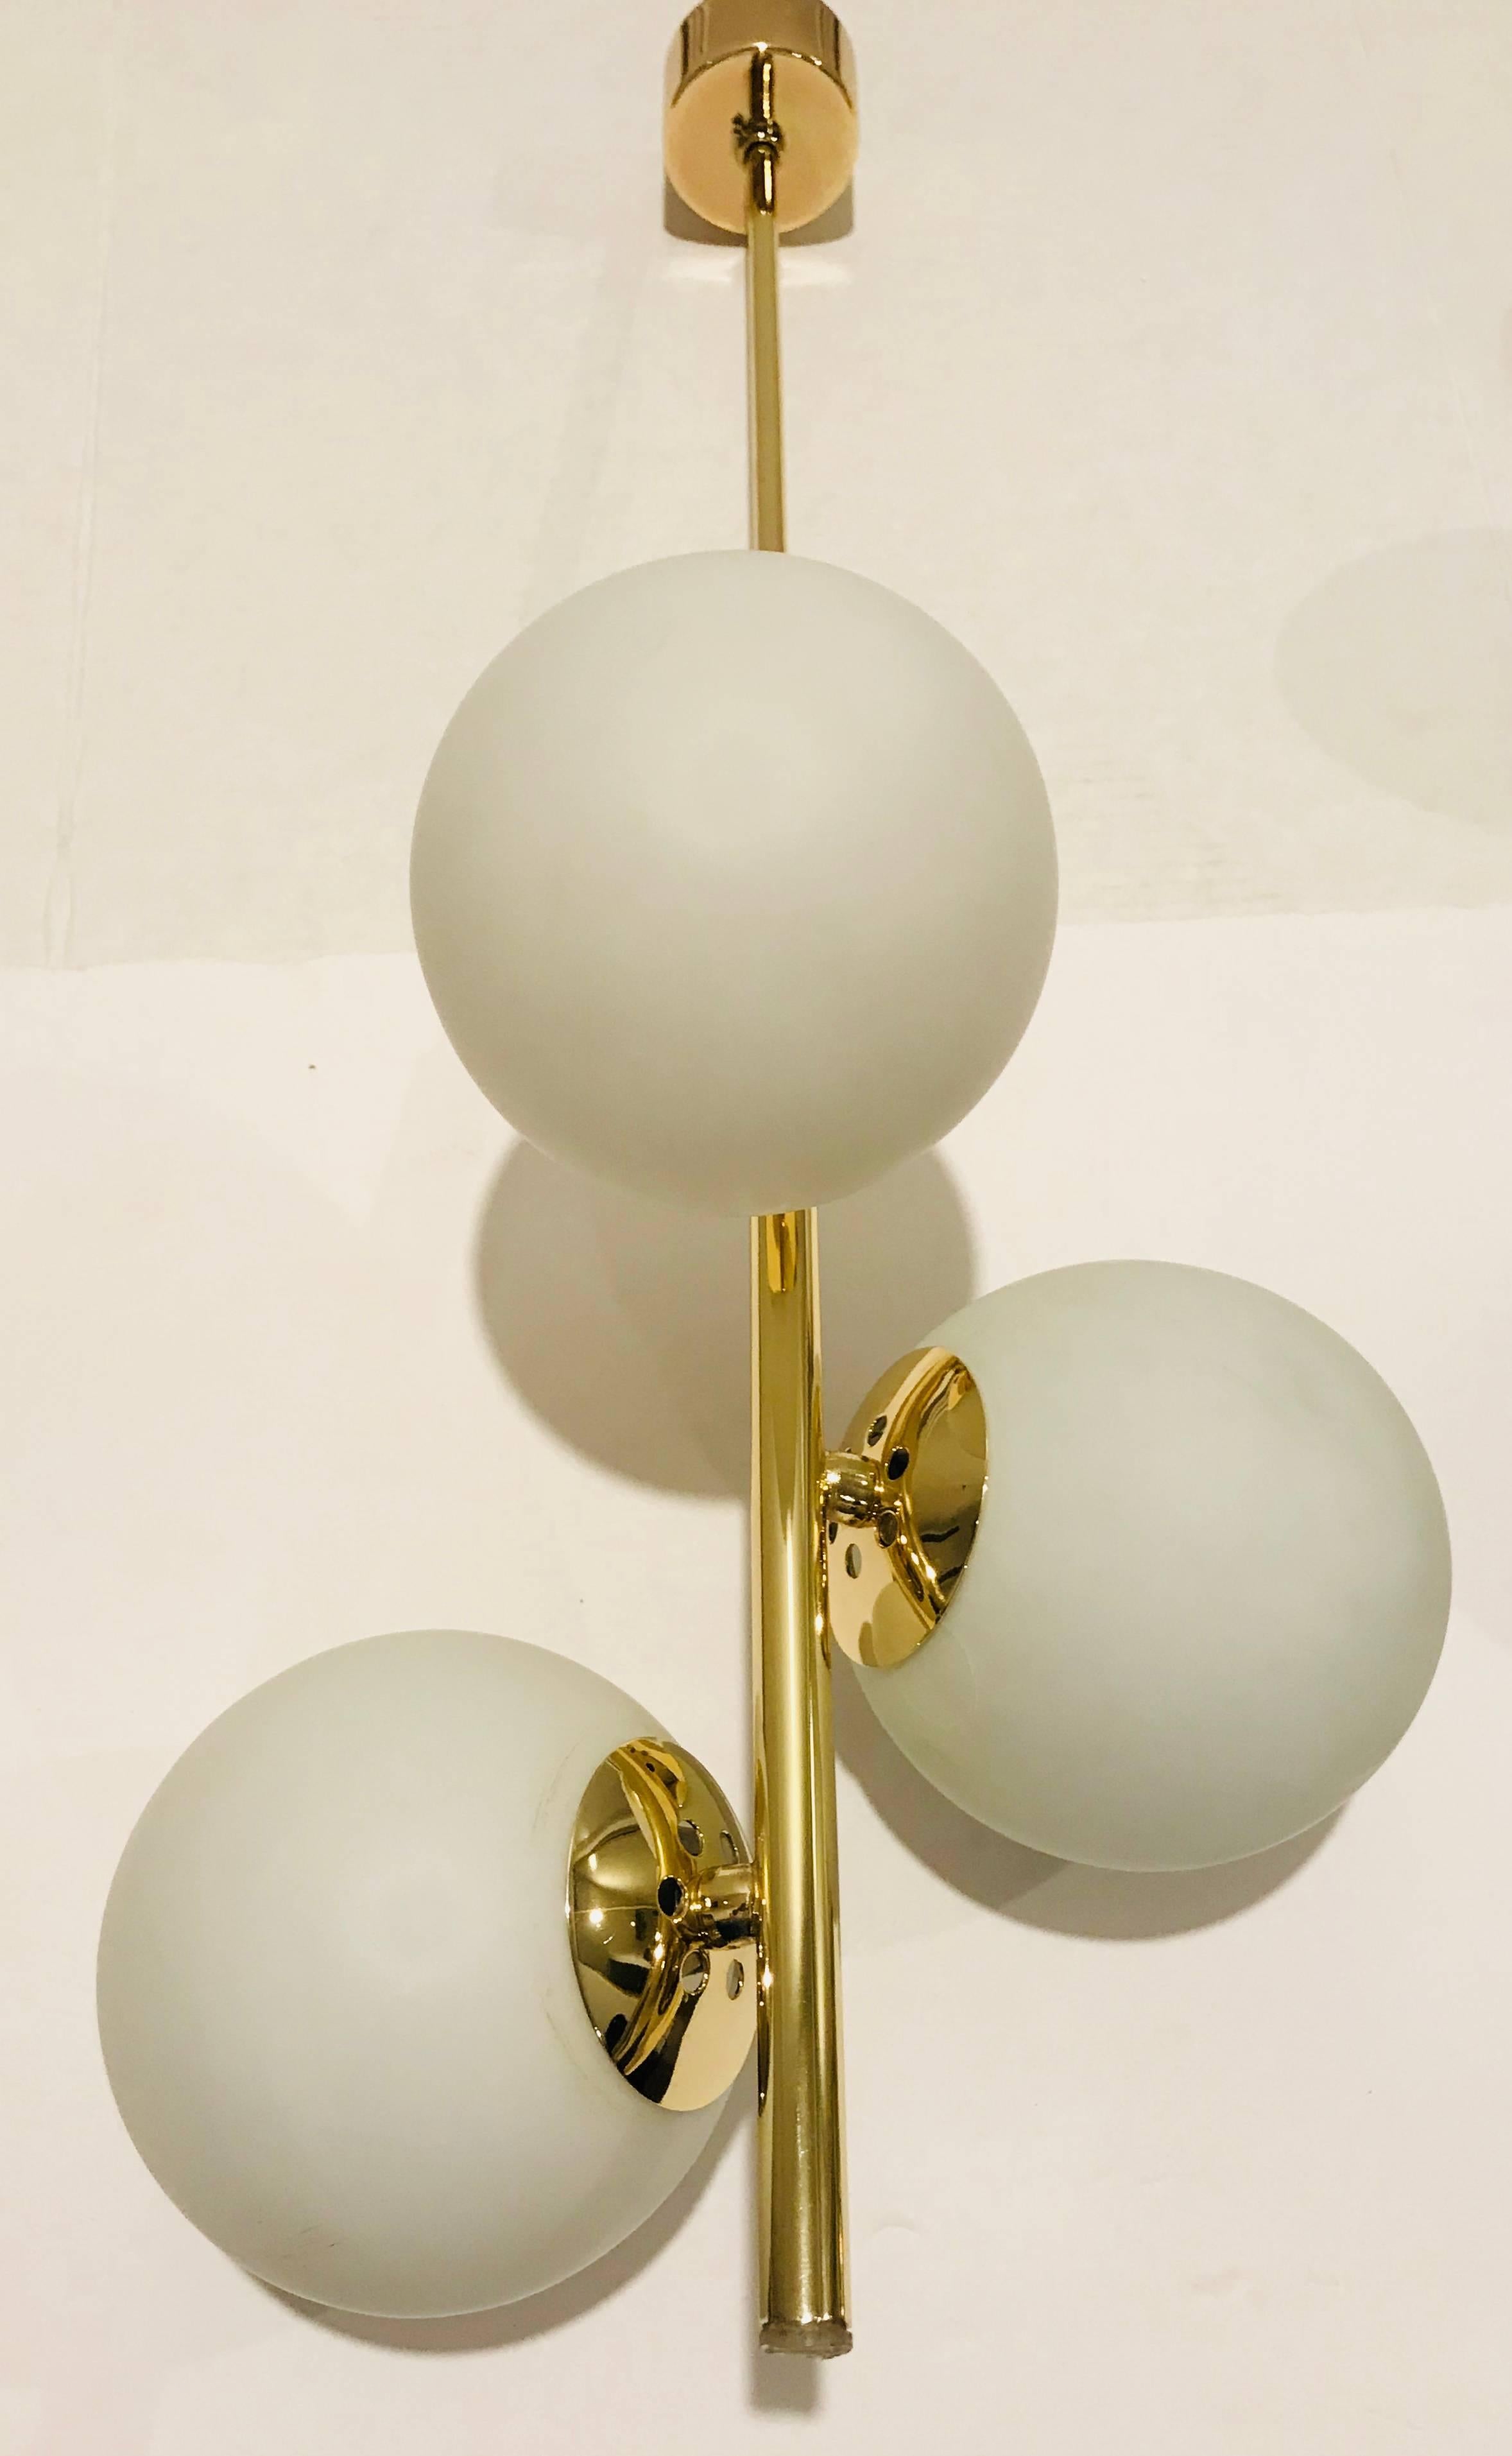 A wonderful pair of 1950s Italian polished brass and white globe pendant lights. Newly rewired. The ceiling pole can be shortened or lengthened depending on need.